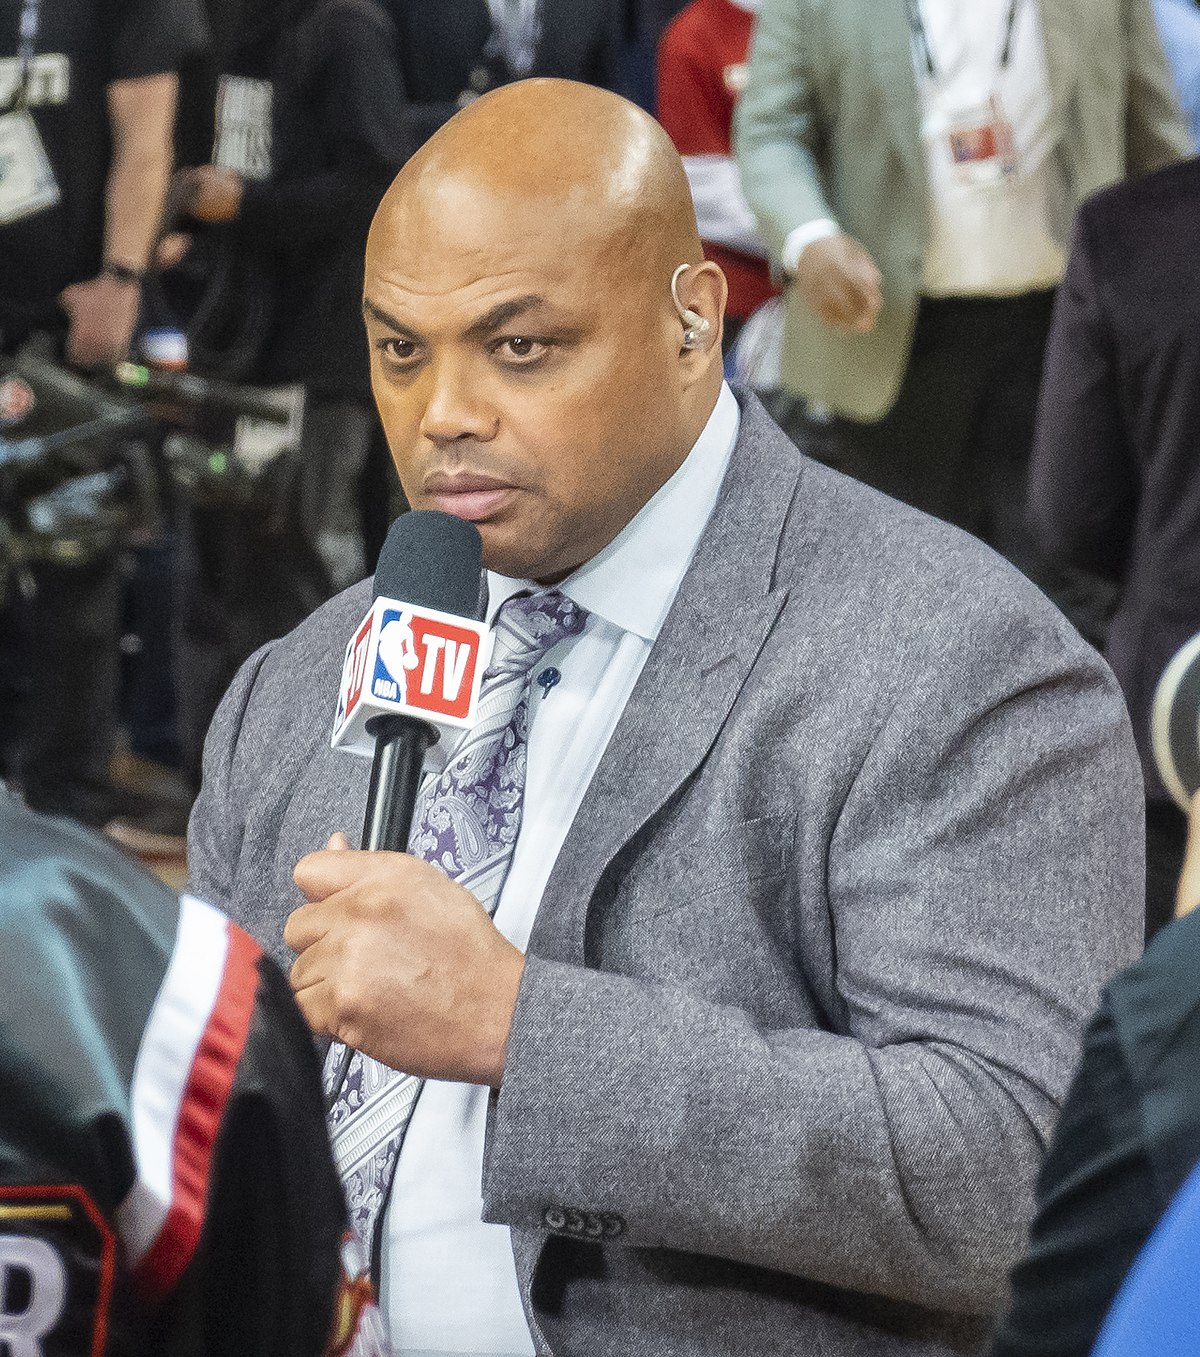 How many championships does Charles Barkley have? - Quora